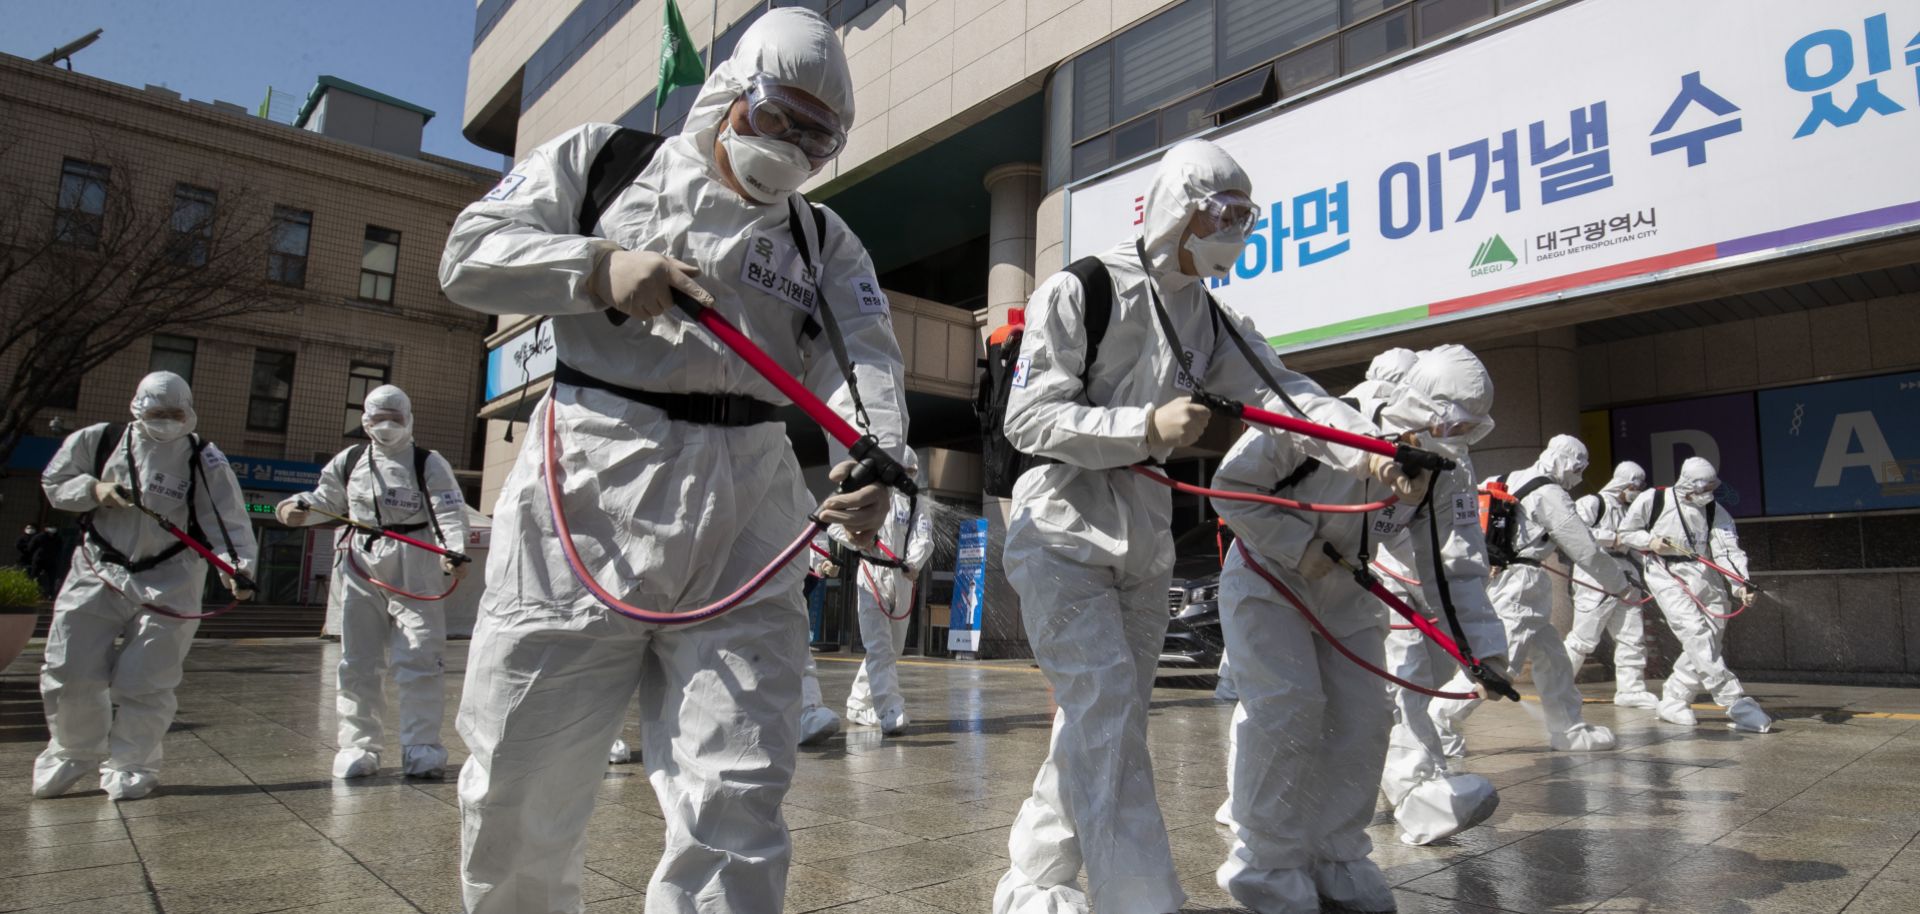 South Korean soldiers in protective suits spray disinfectant on March 2, 2020, in Daegu, South Korea.